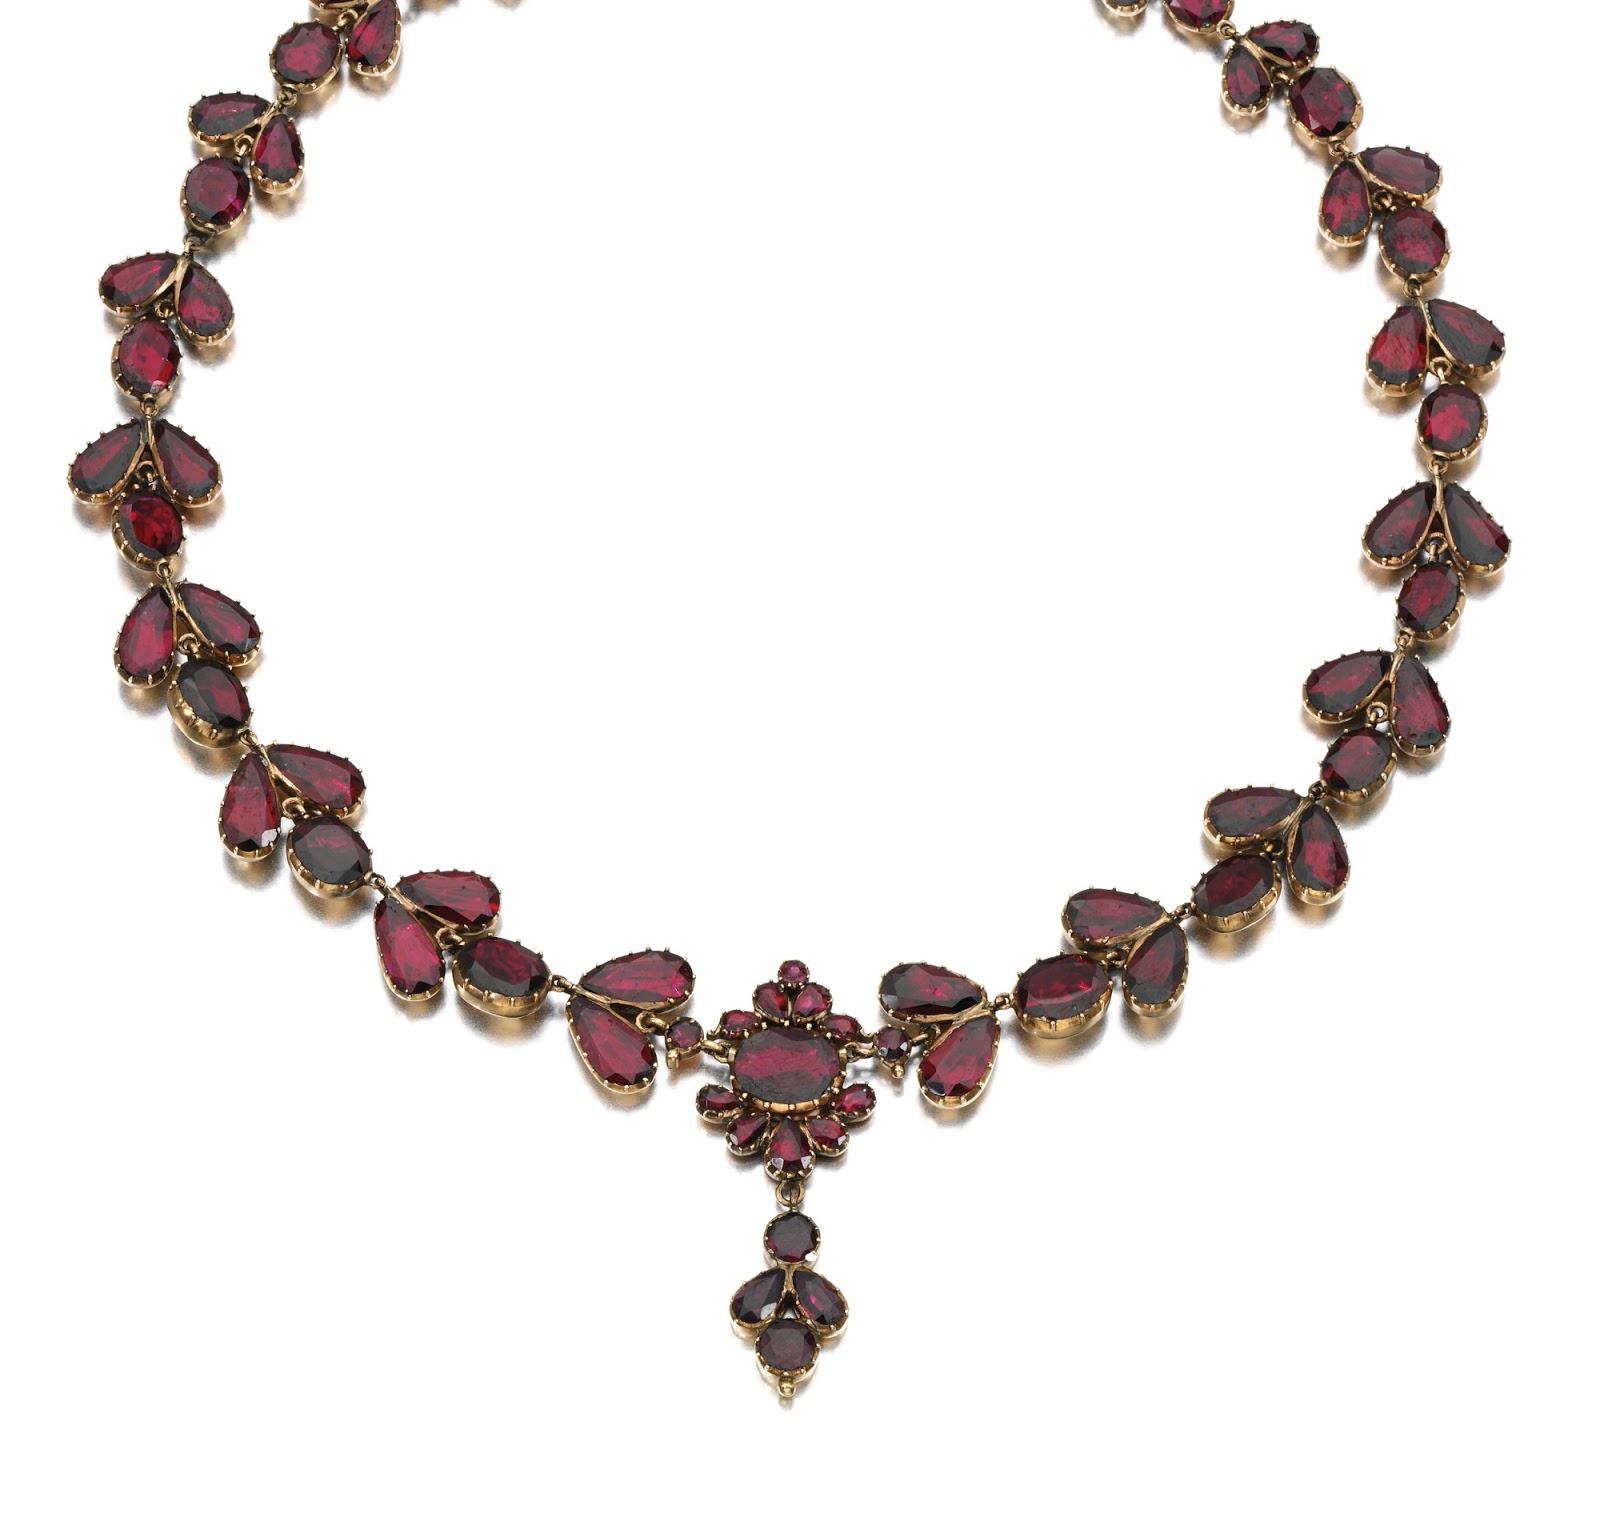 Marie Poutine's Jewels & Royals: Pink and Red Necklaces